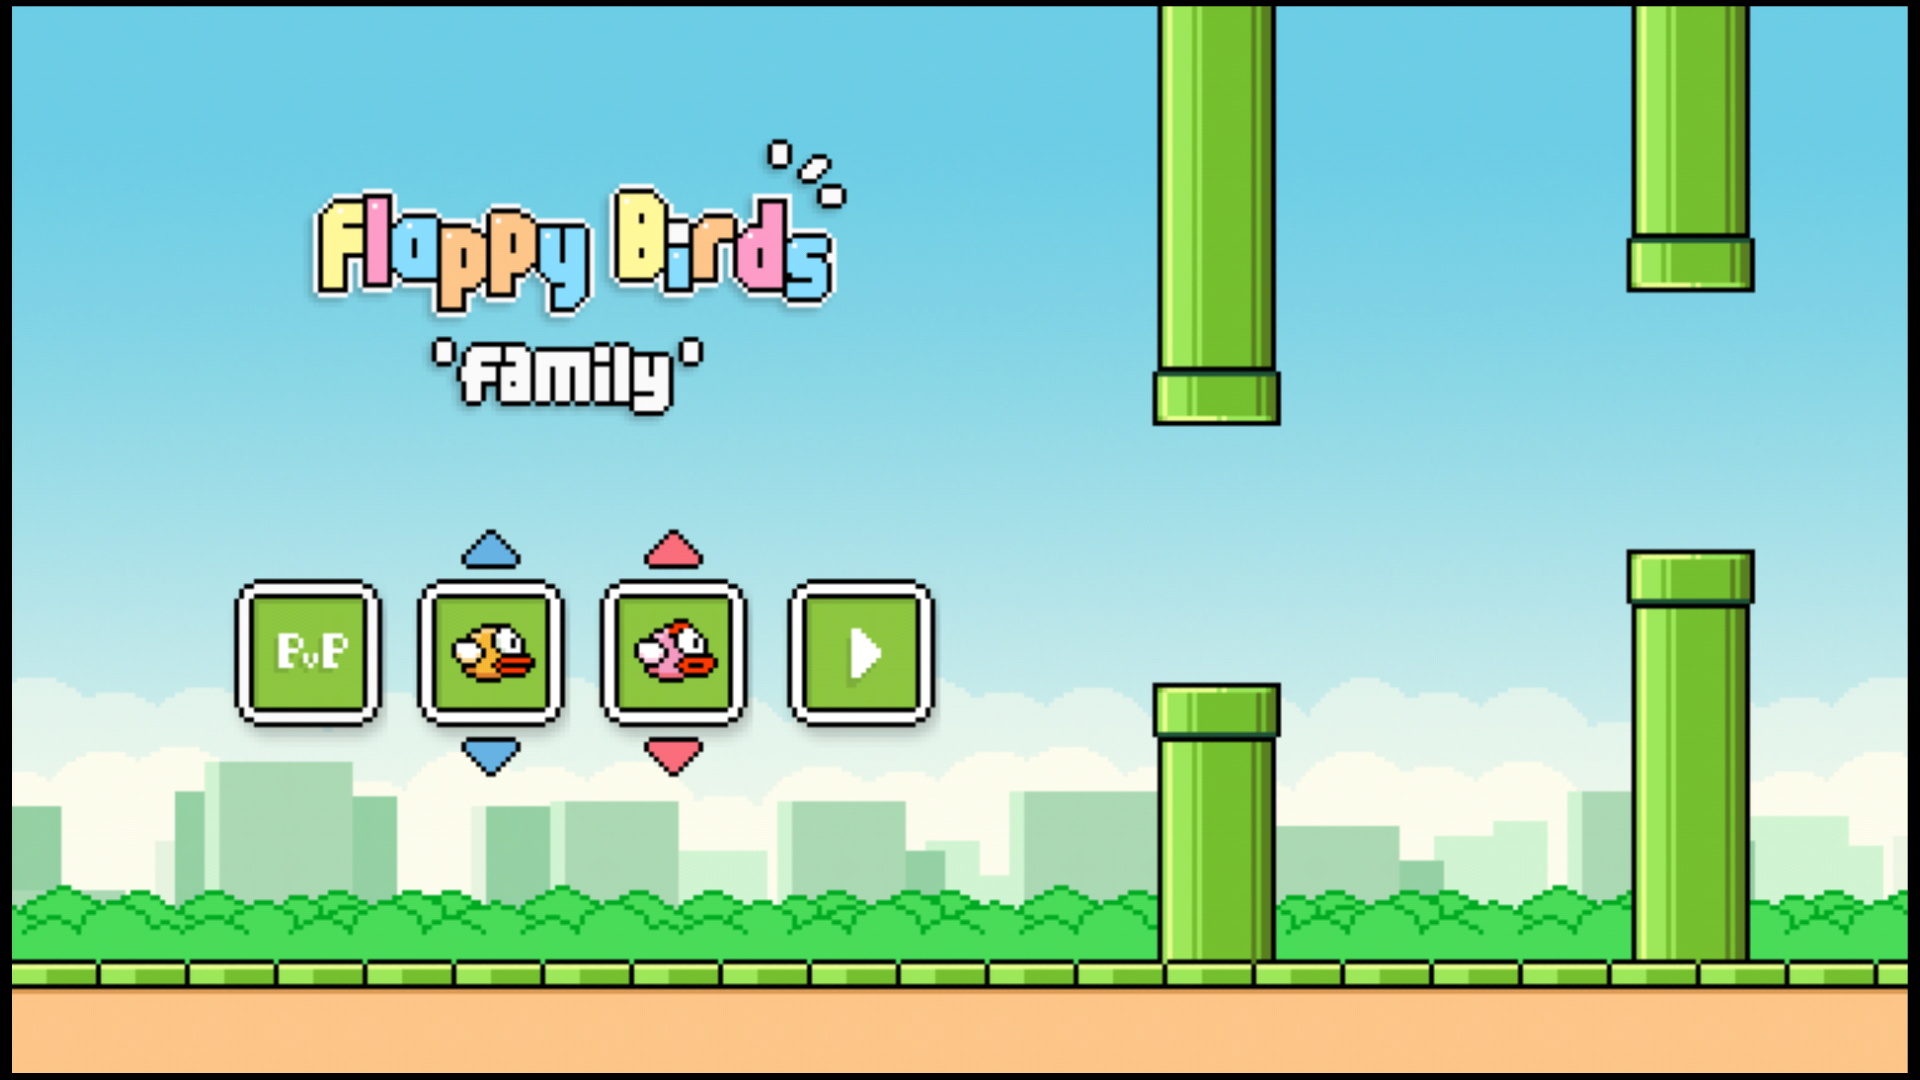 Flappy Birds Family: Amazon.ca: Appstore for Android